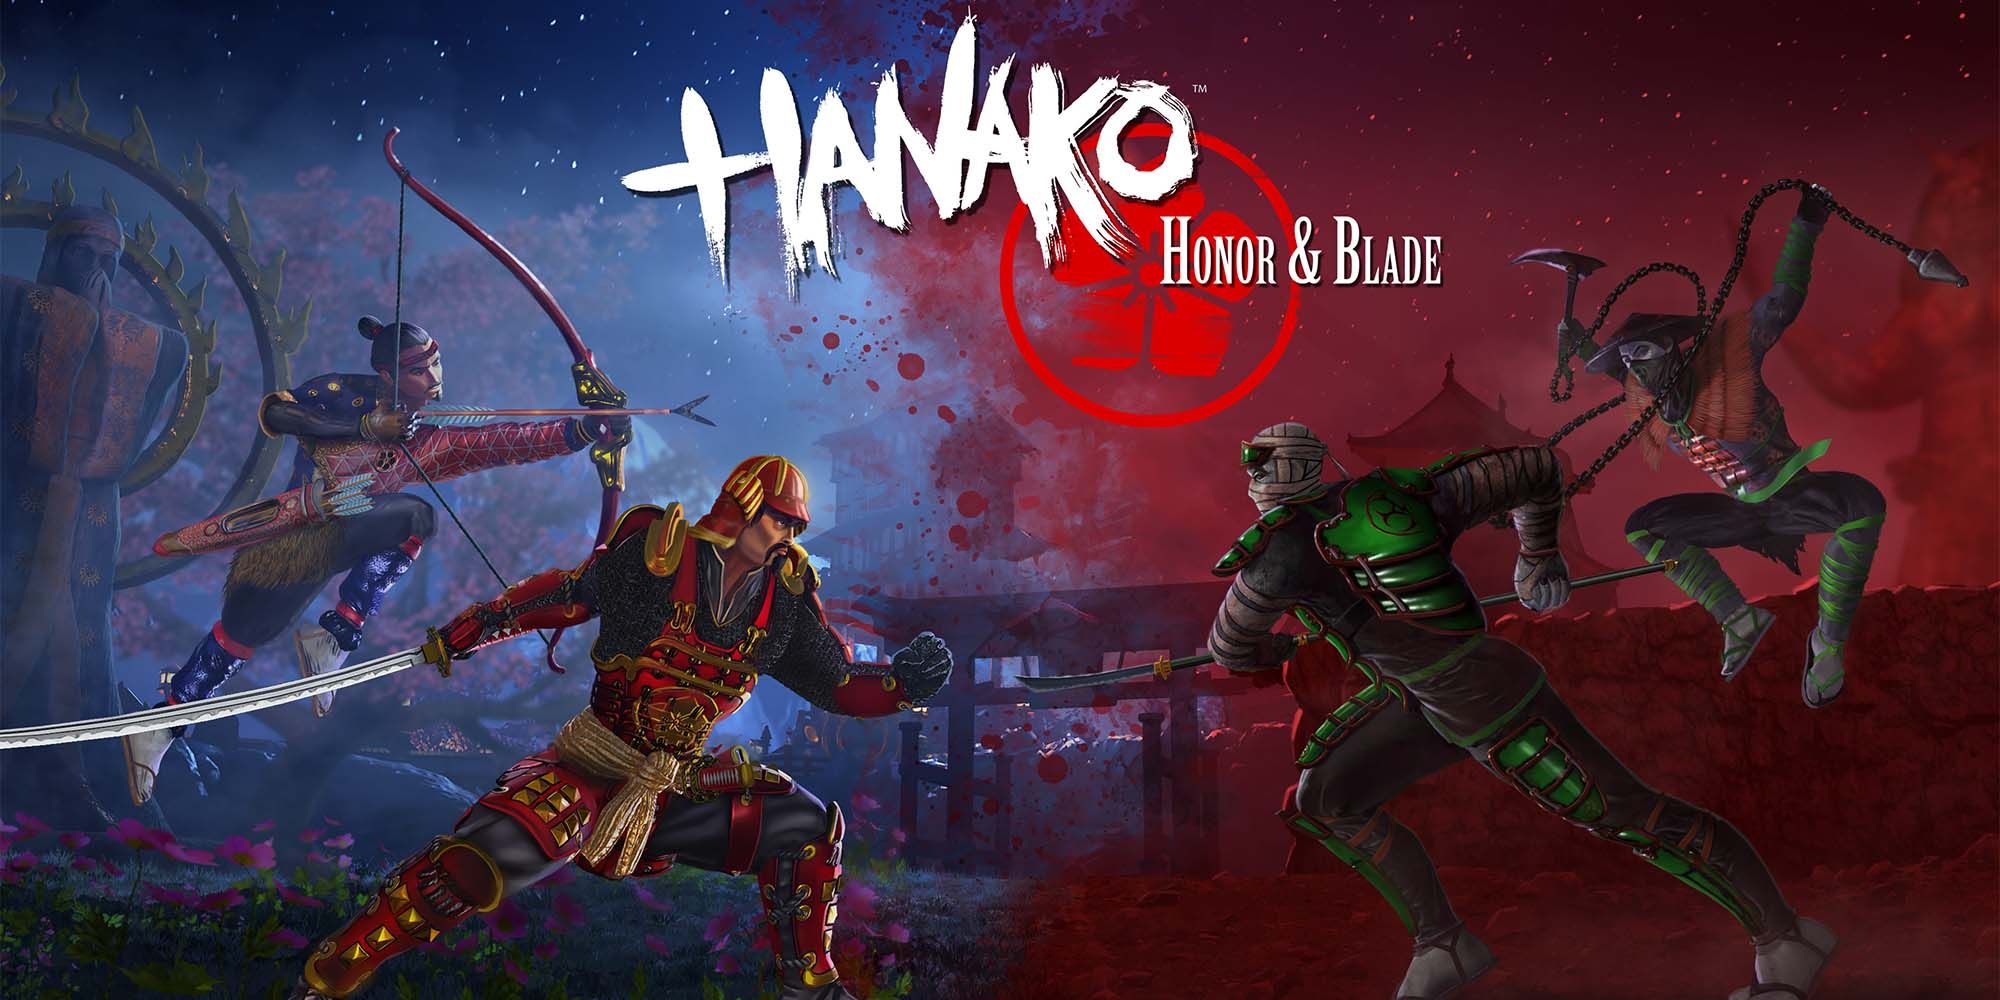 Hanako title over the rival clans